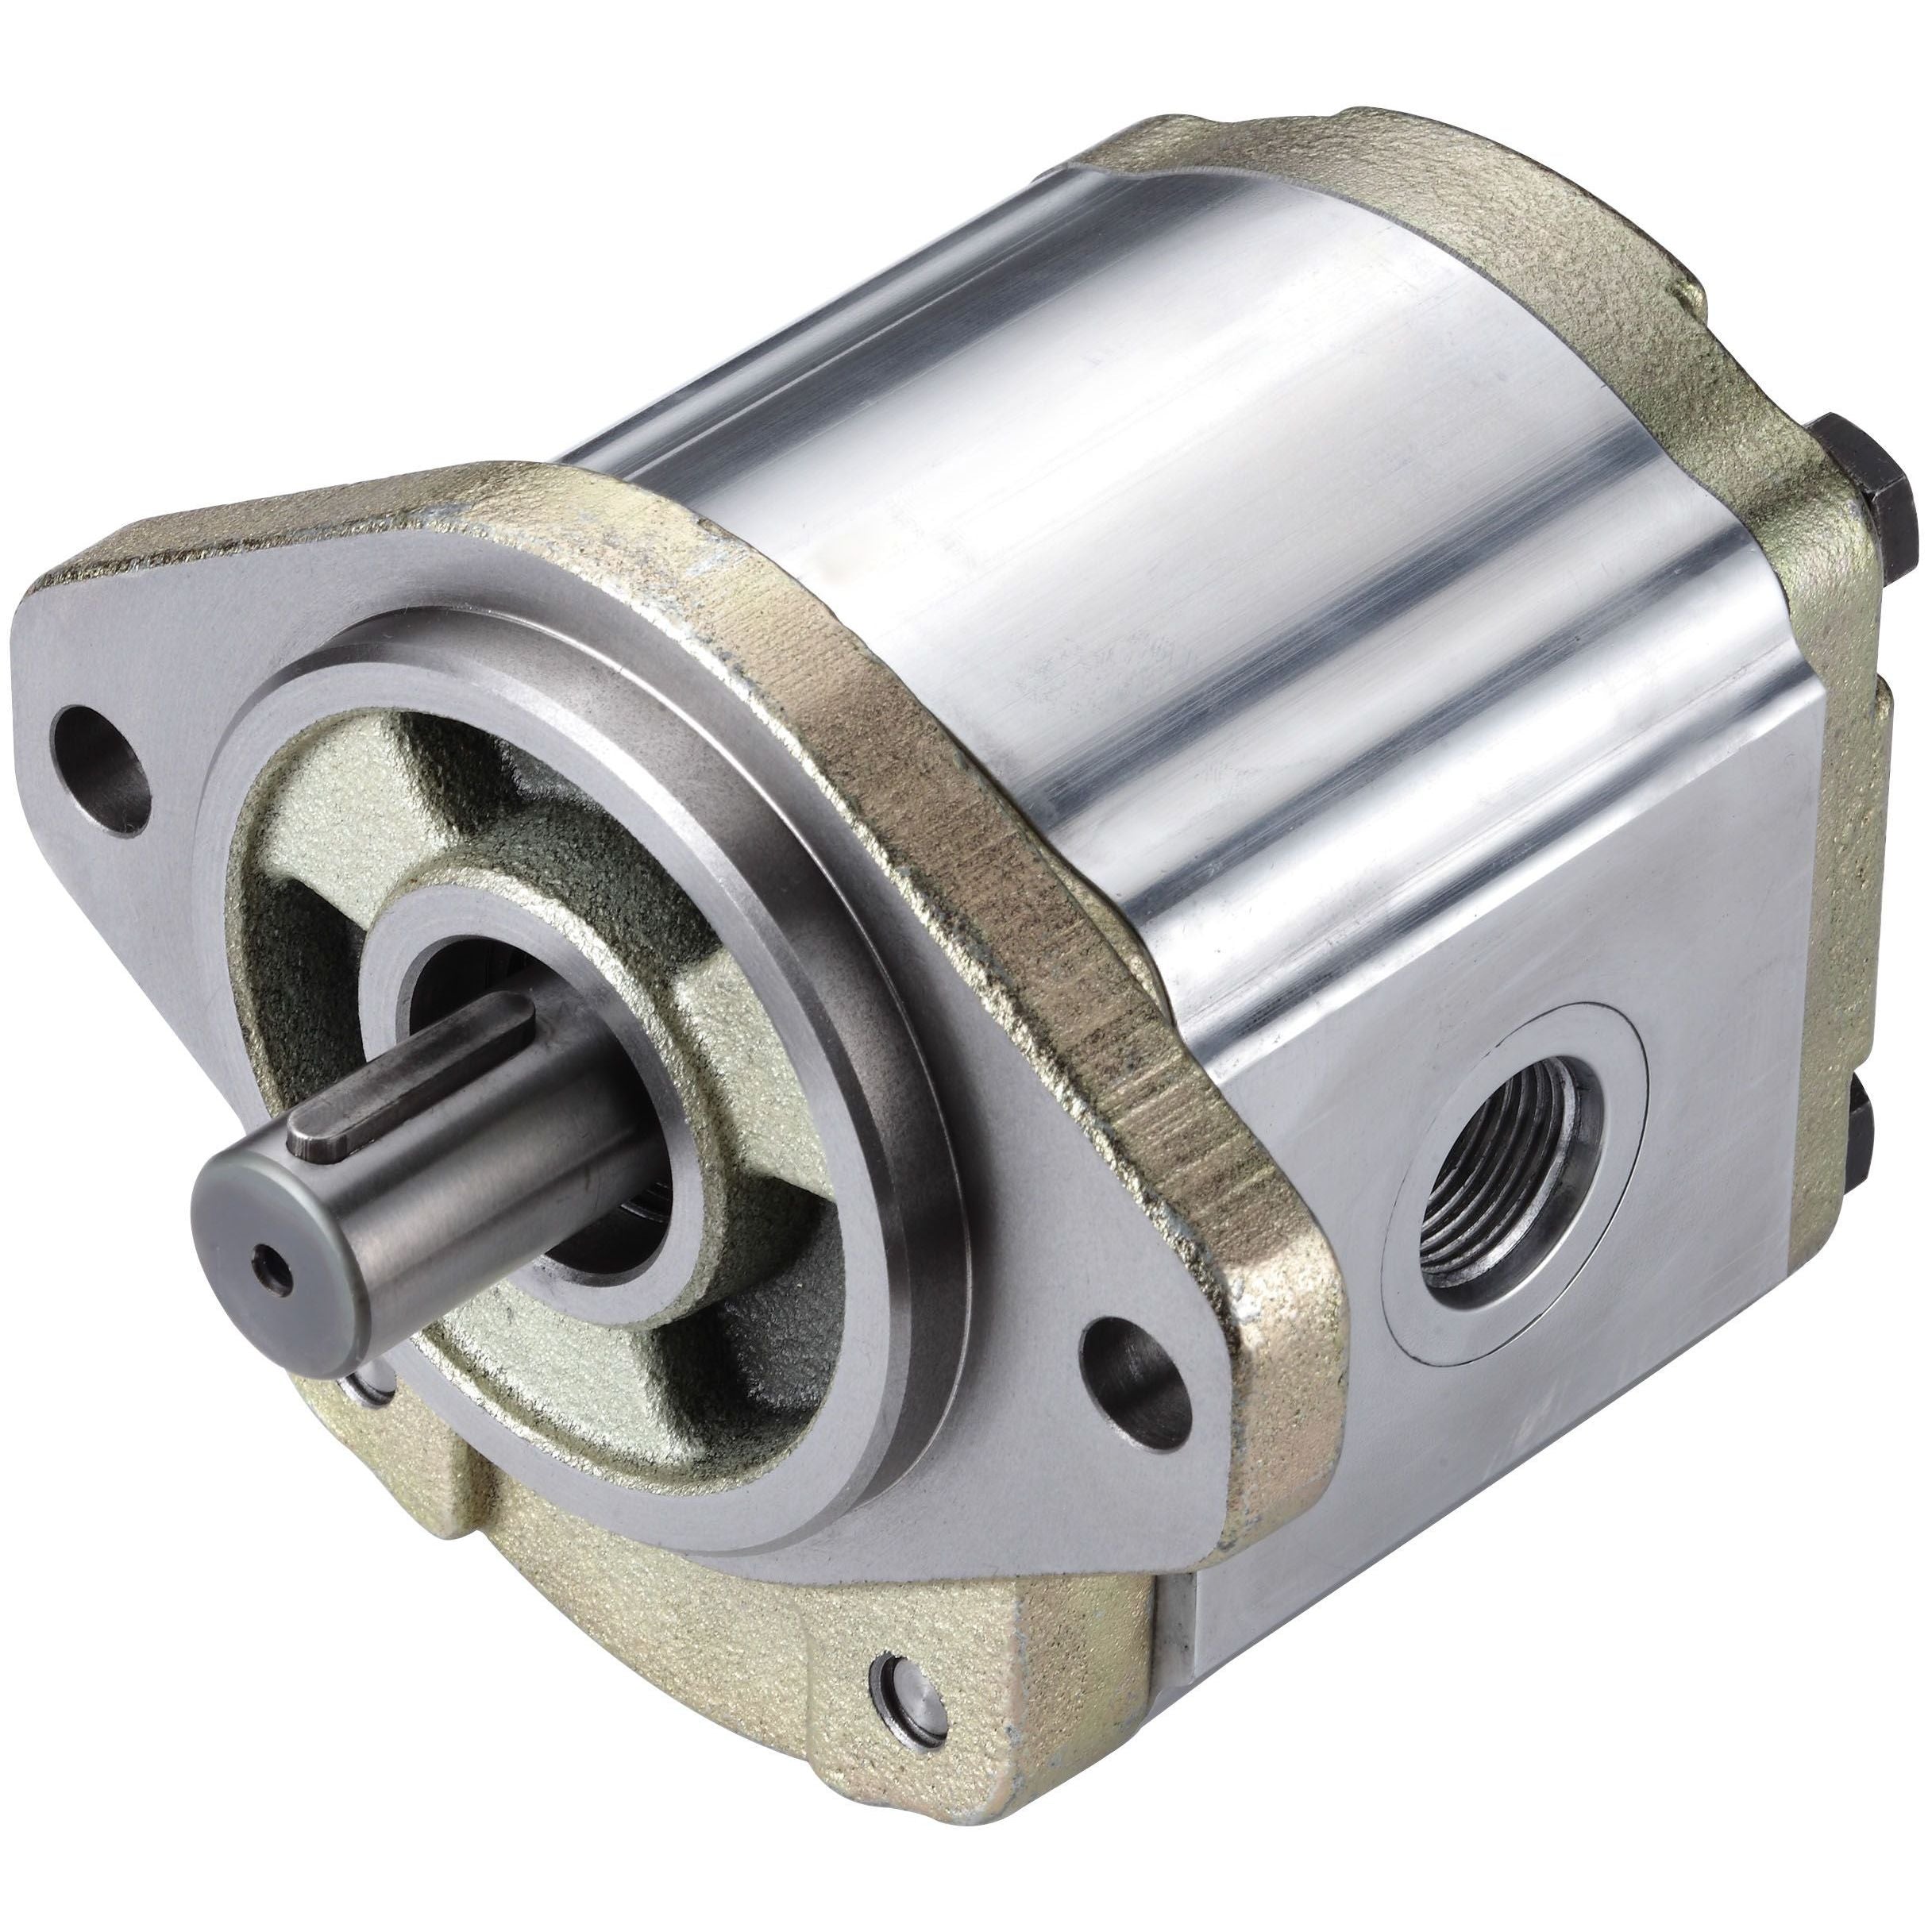 3GB8ZU260L : Honor Gear Pump, CCW Rotation, 60cc (3.66in3), 28.53 GPM, 2600psi, 2500 RPM, #20 SAE (1.25") In, #12 SAE (3/4") Out, Splined Shaft 13-Tooth, 16/32 Pitch, SAE B 2-Bolt Mount